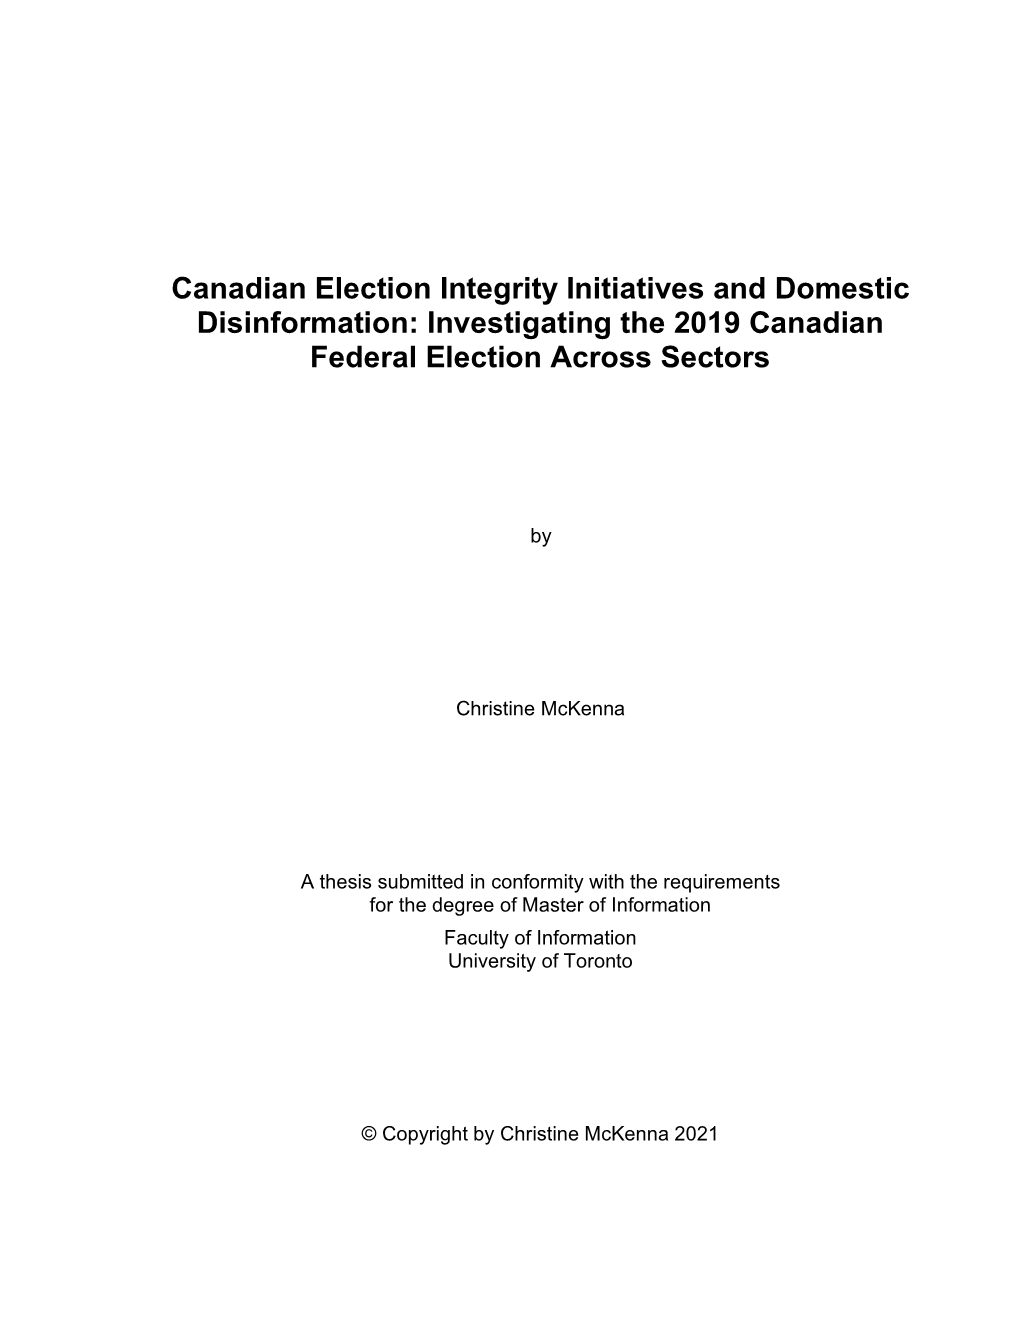 Canadian Election Integrity Initiatives and Domestic Disinformation: Investigating the 2019 Canadian Federal Election Across Sectors